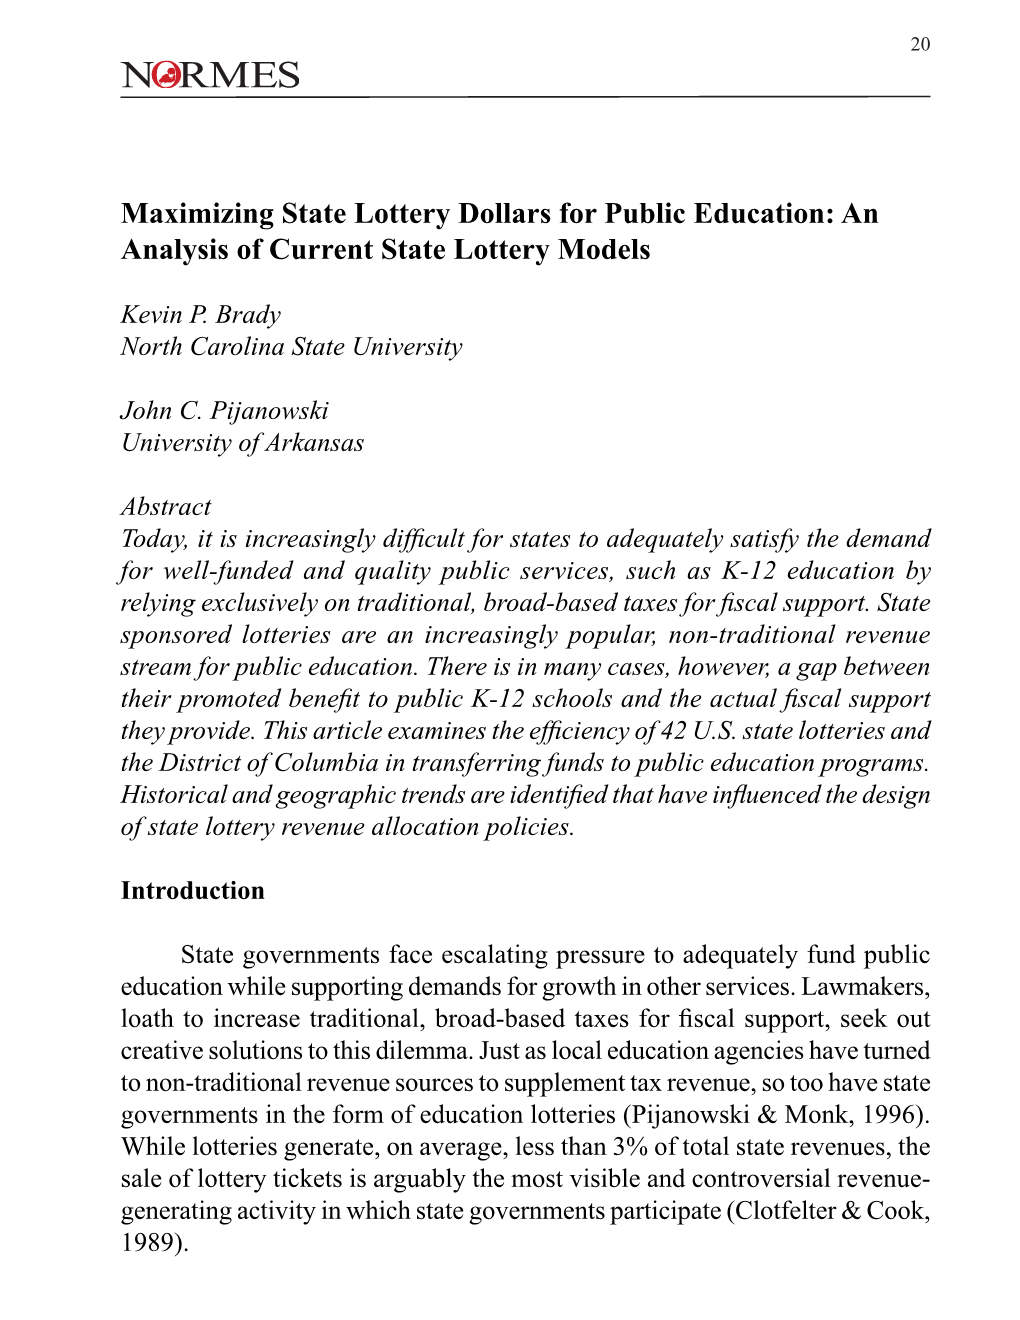 Maximizing State Lottery Dollars for Public Education: an Analysis of Current State Lottery Models